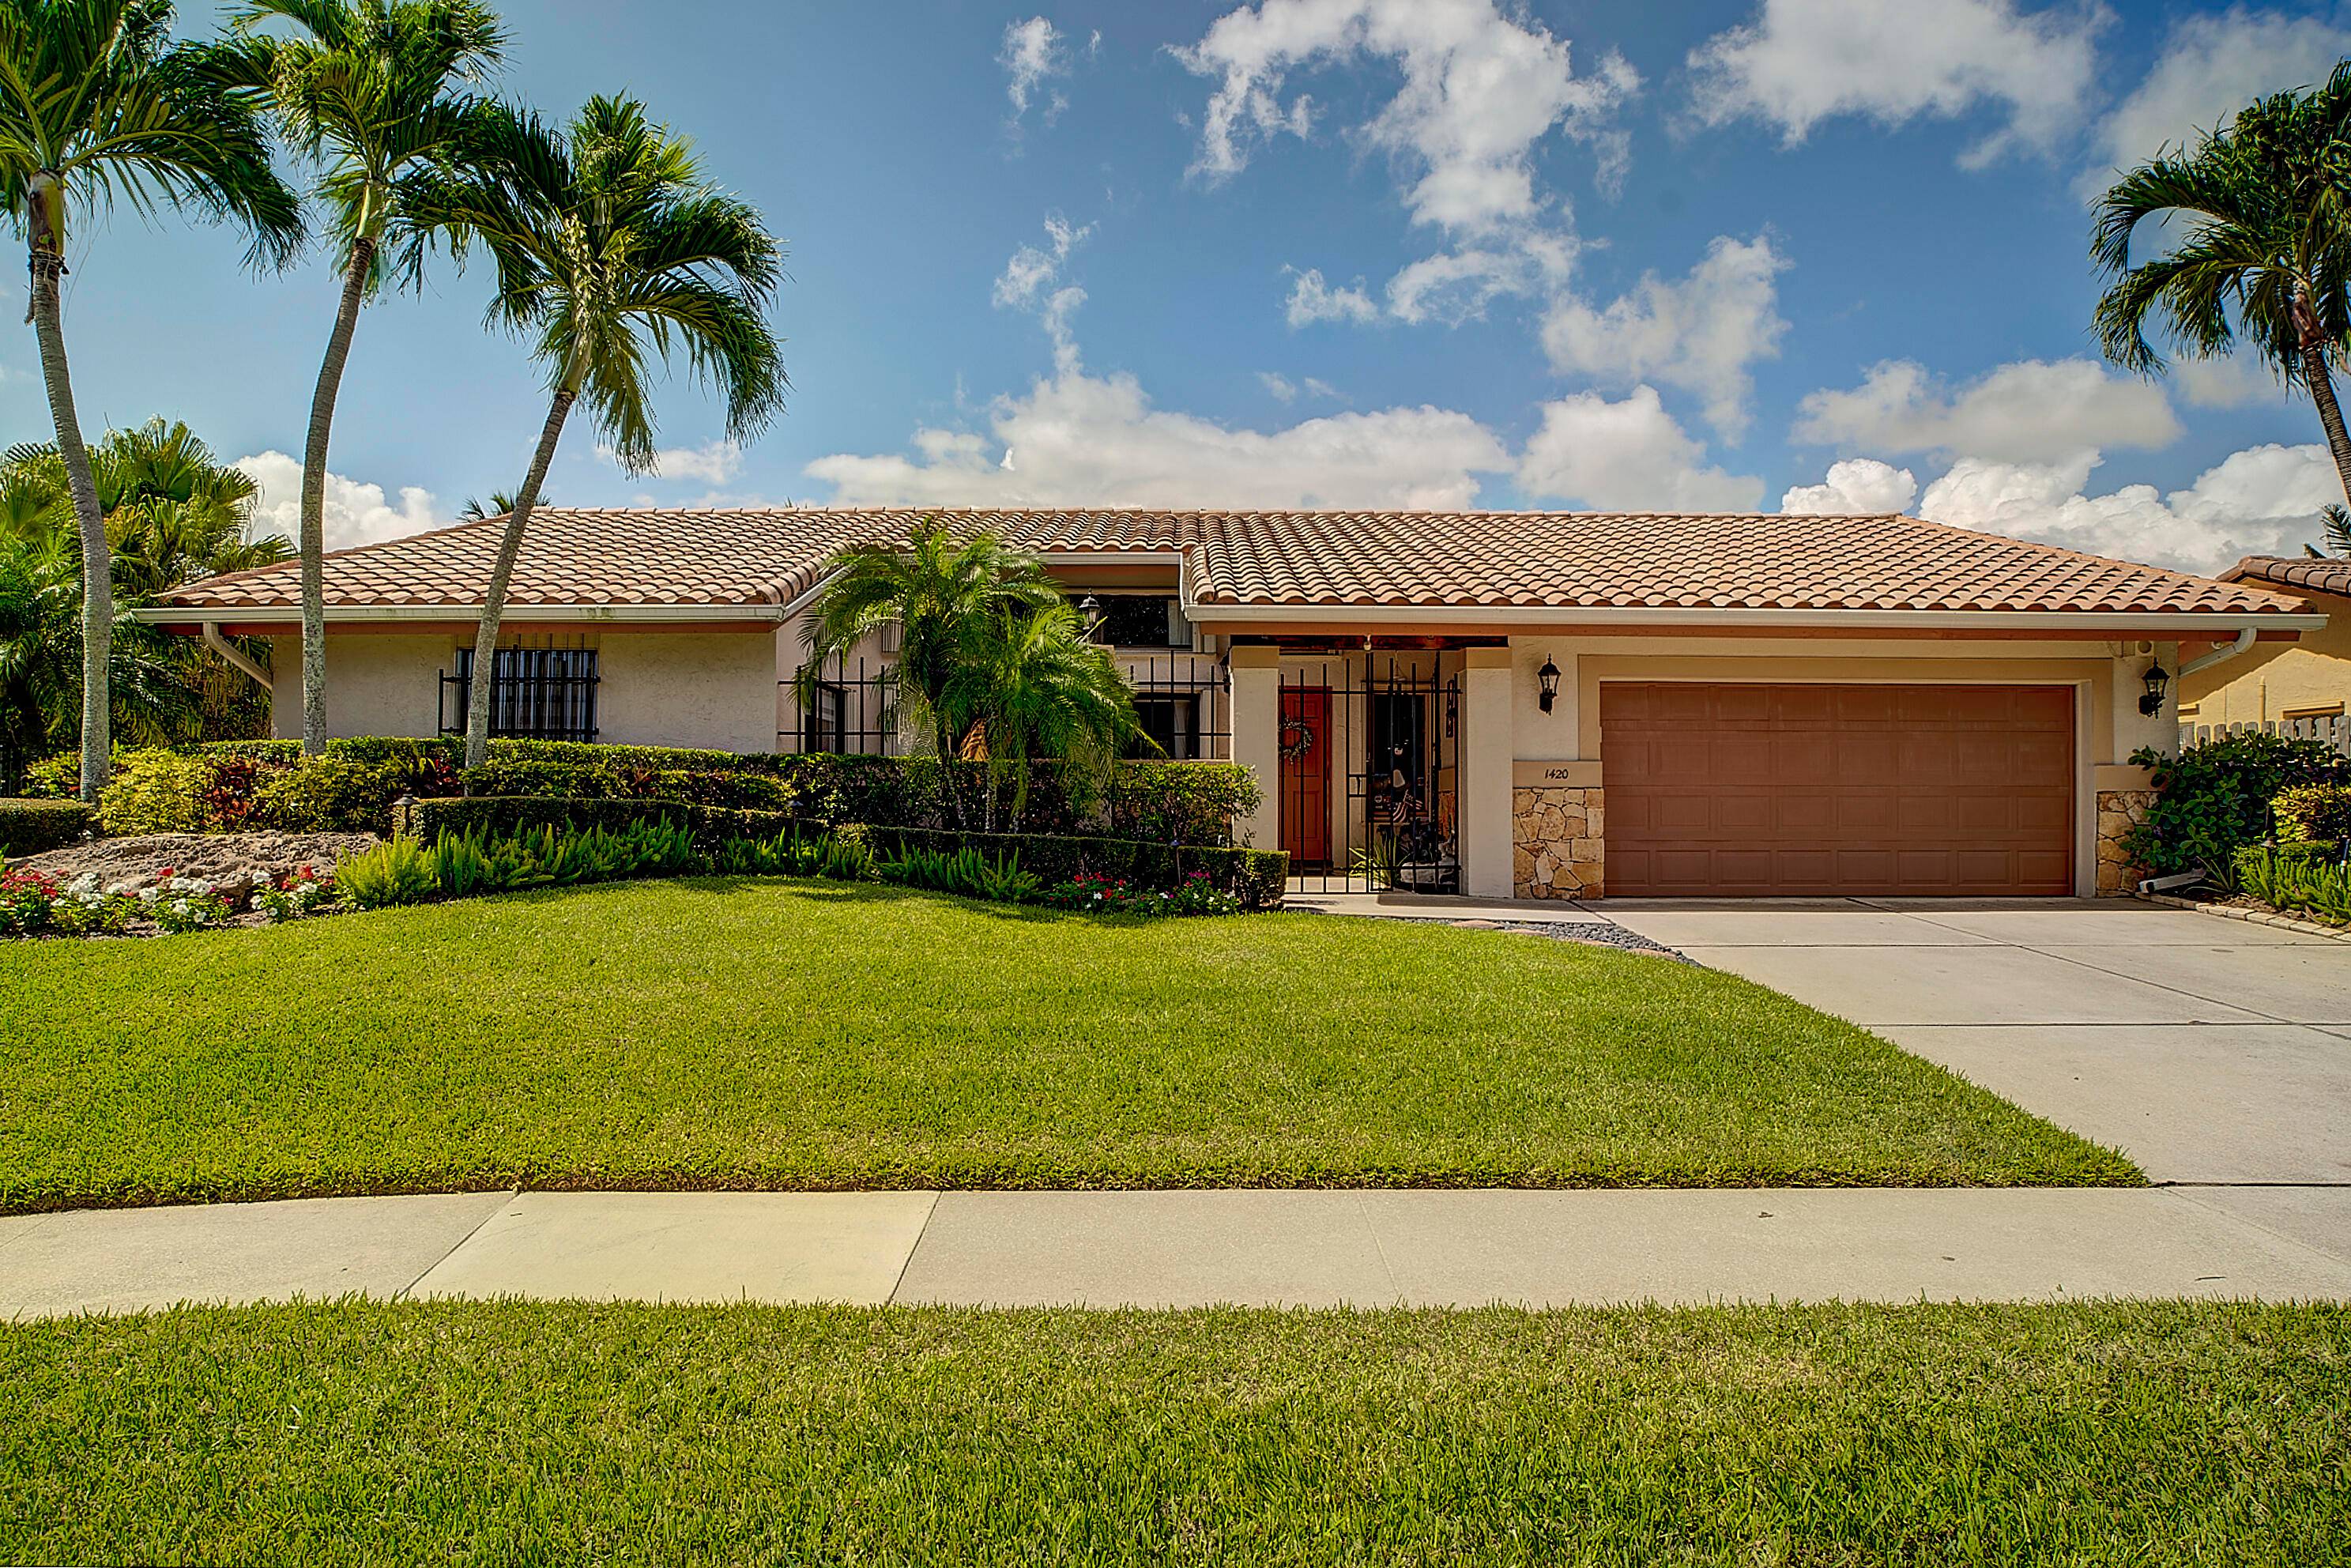 Wow only 2 homes like this in Palm Beach Farms, featuring 4 bedrooms 2 1 2 baths built in screened lanai and pool area.